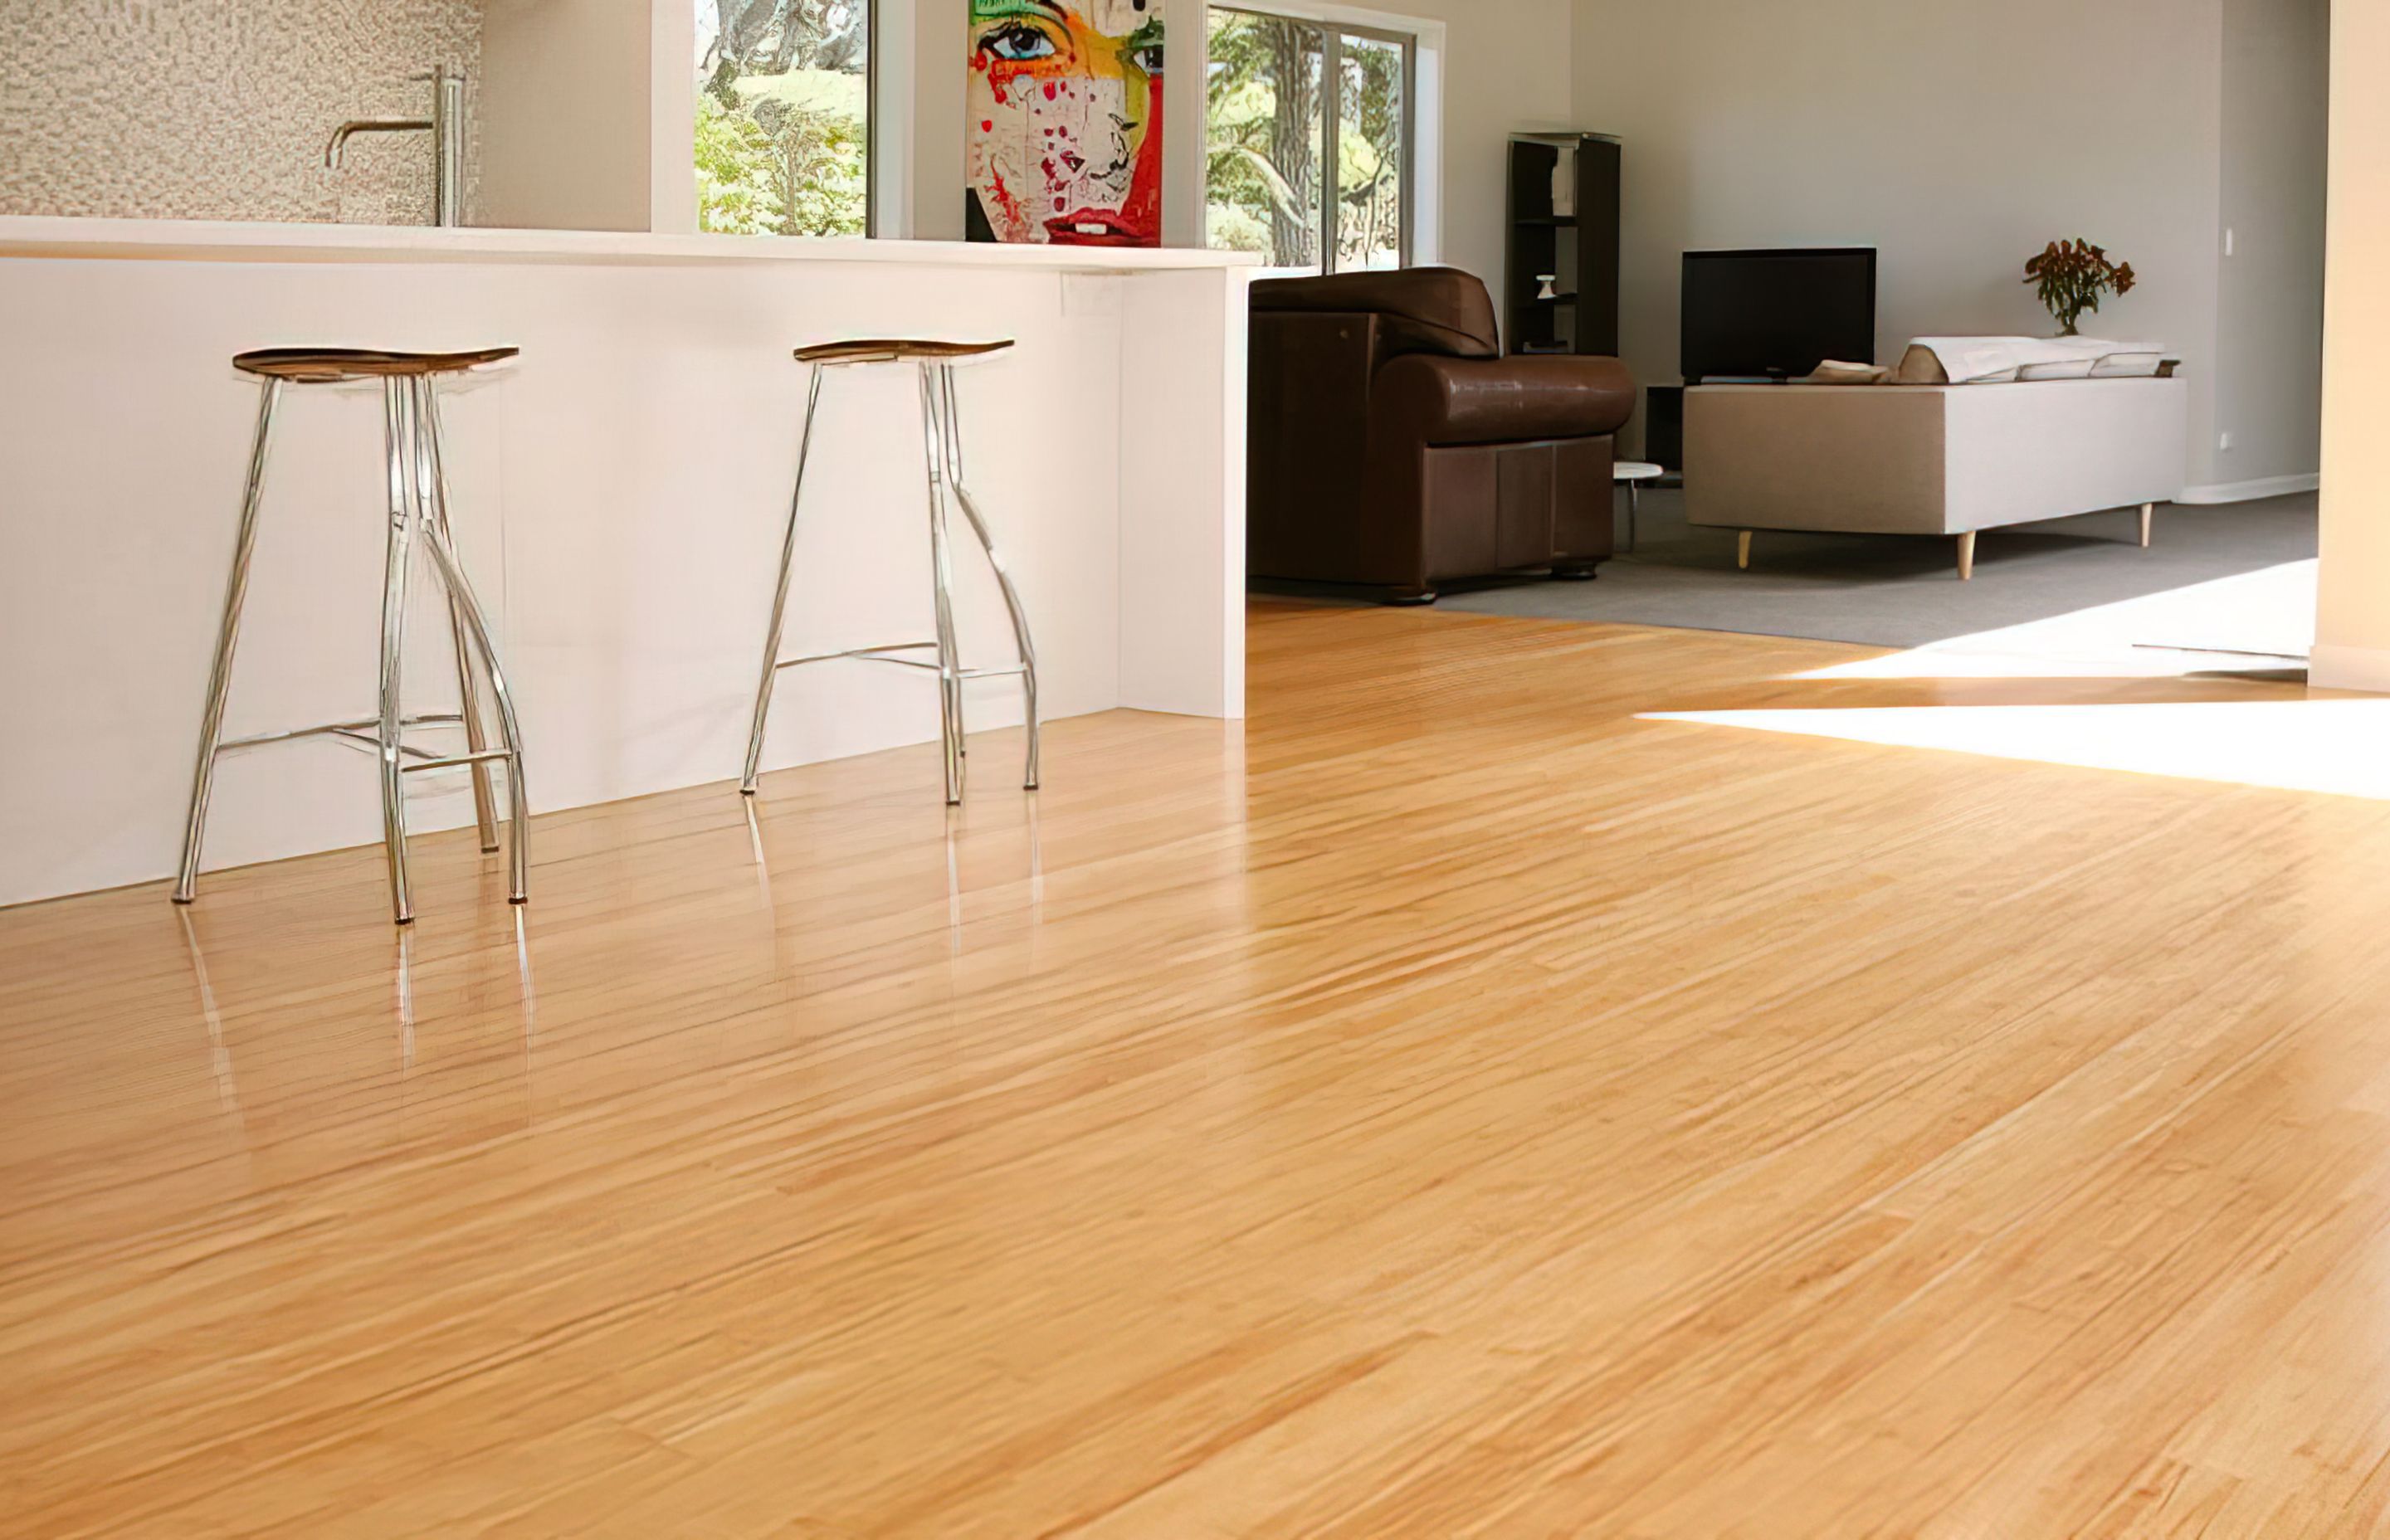 Six reasons why bamboo flooring is THE flooring of 2021